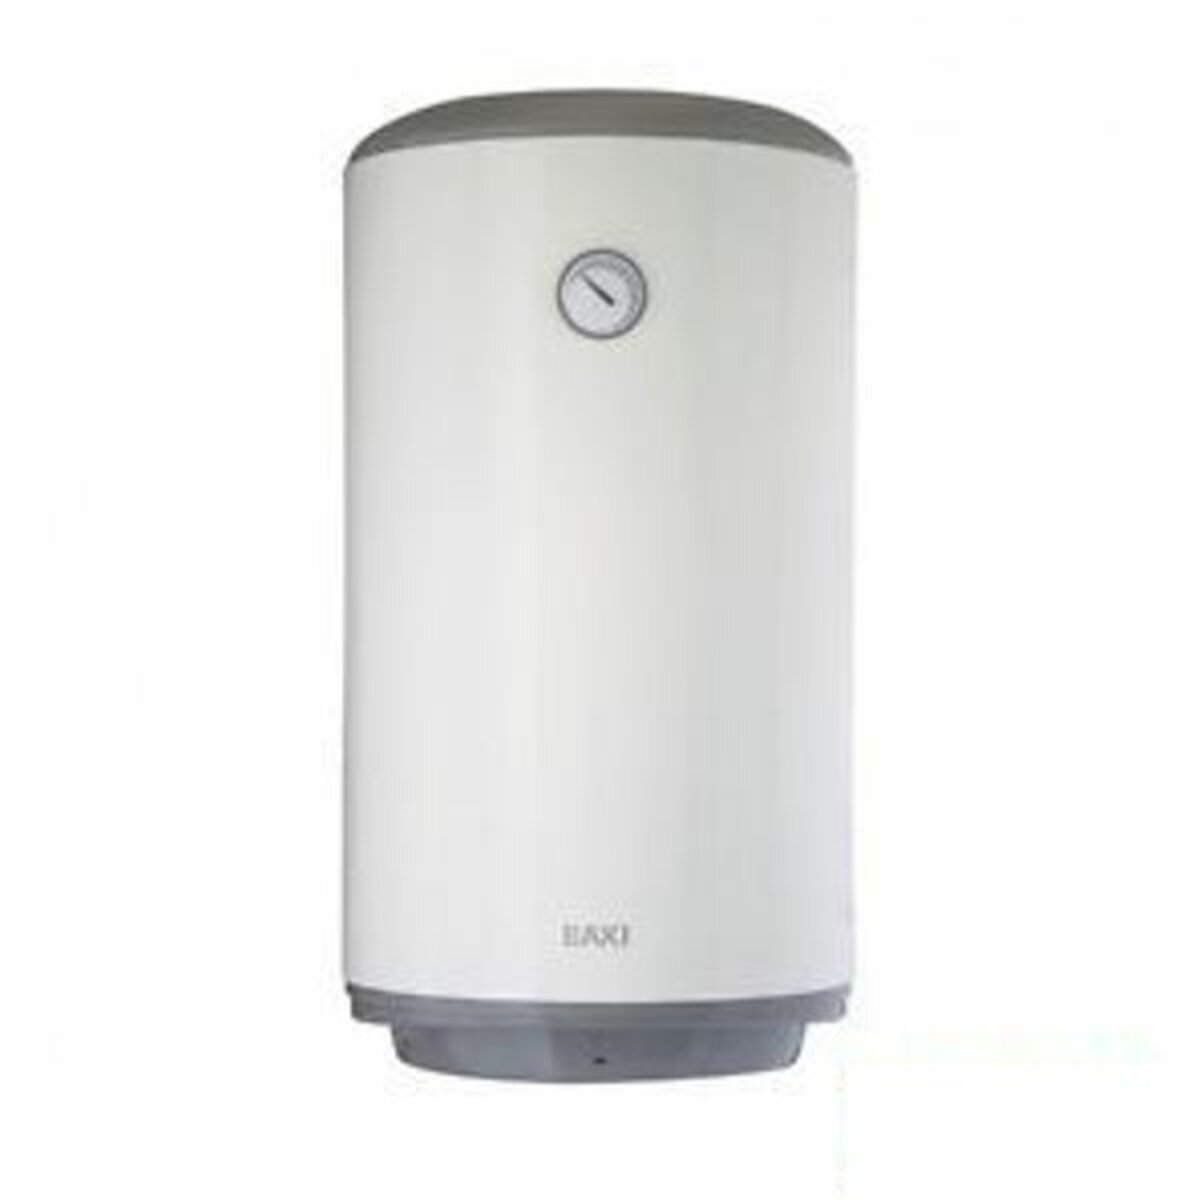 Electric water heater ExtrA line + Baxi v280 80 liters 2 years